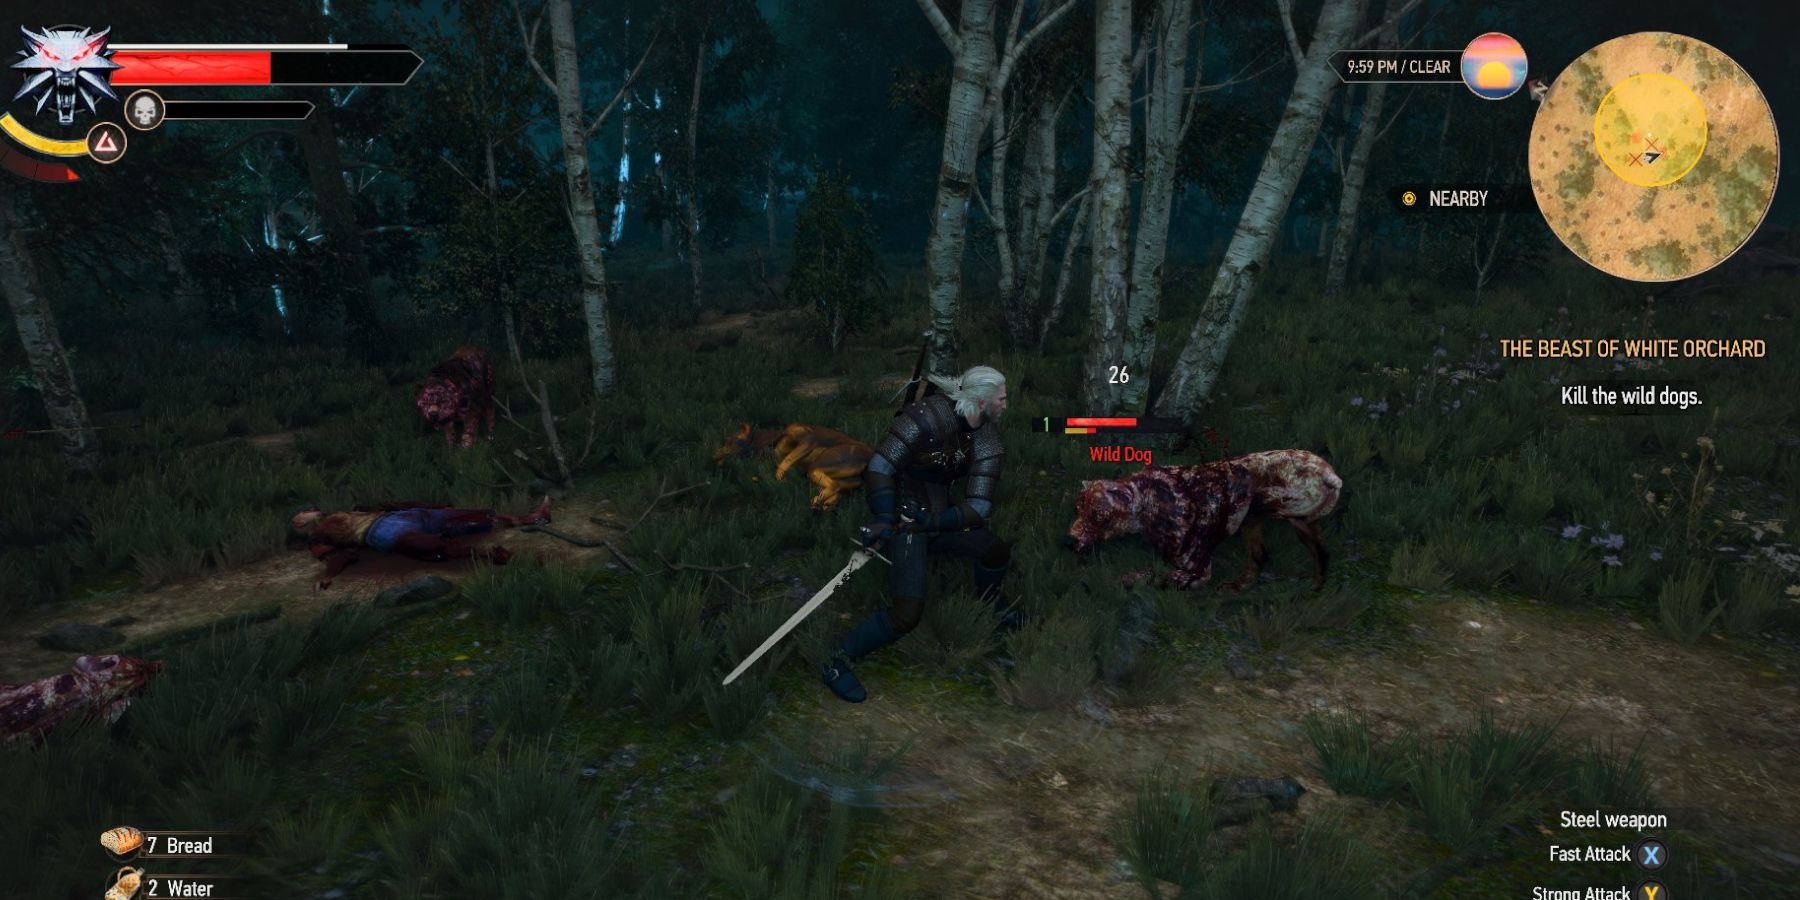 The Witcher 3 Geralt fighting infected wild dogs